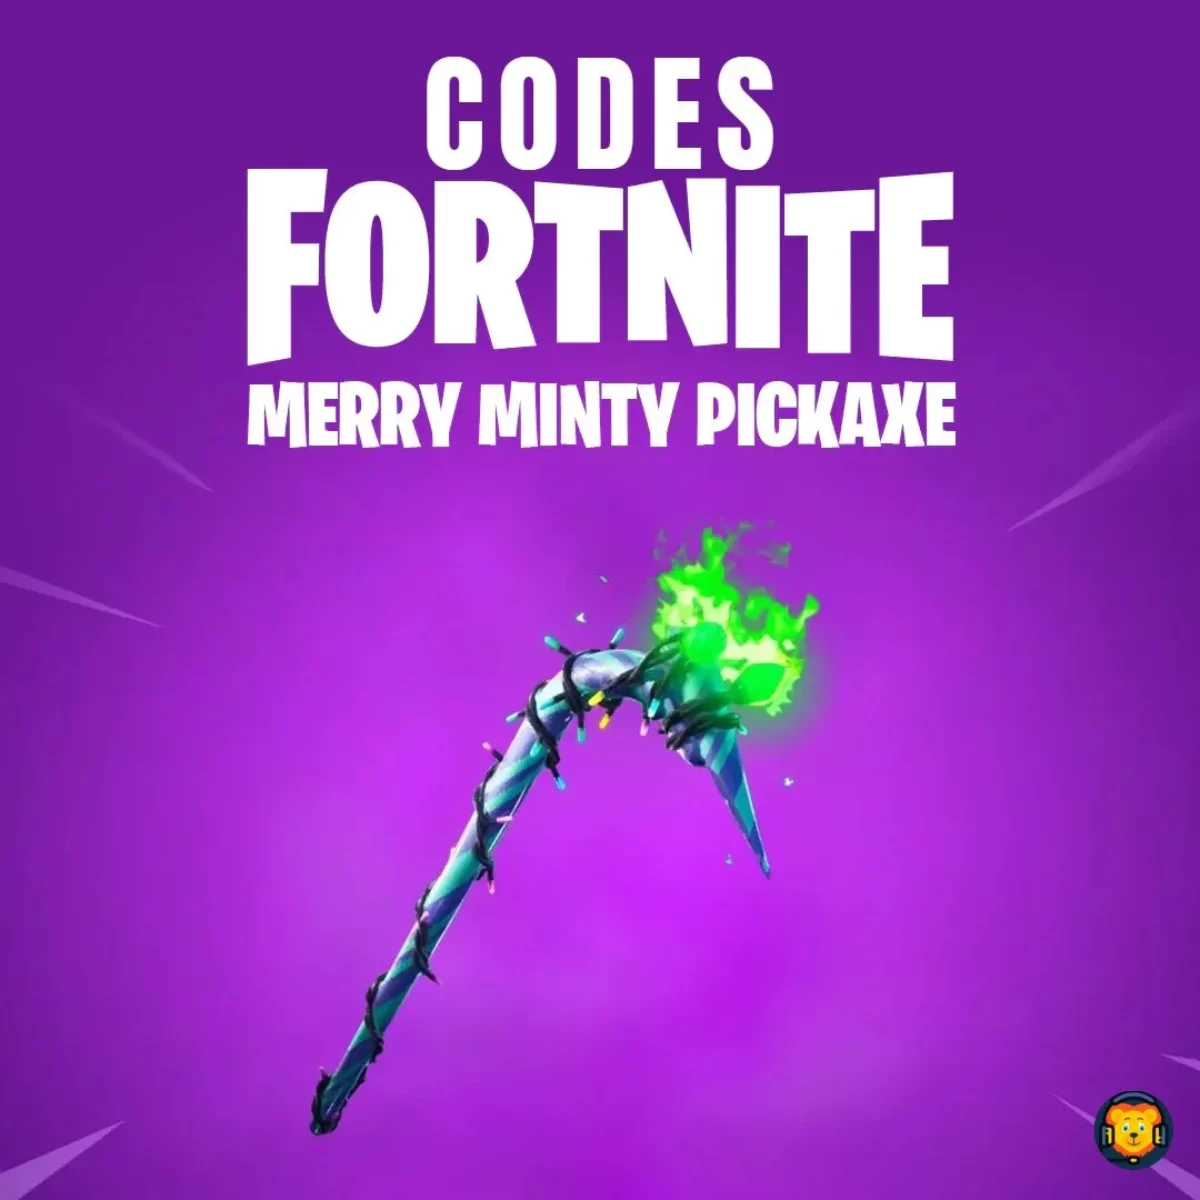 Minty Pickaxe Codes April 22 𝕃𝕀𝕆ℕ𝕁𝔼𝕂